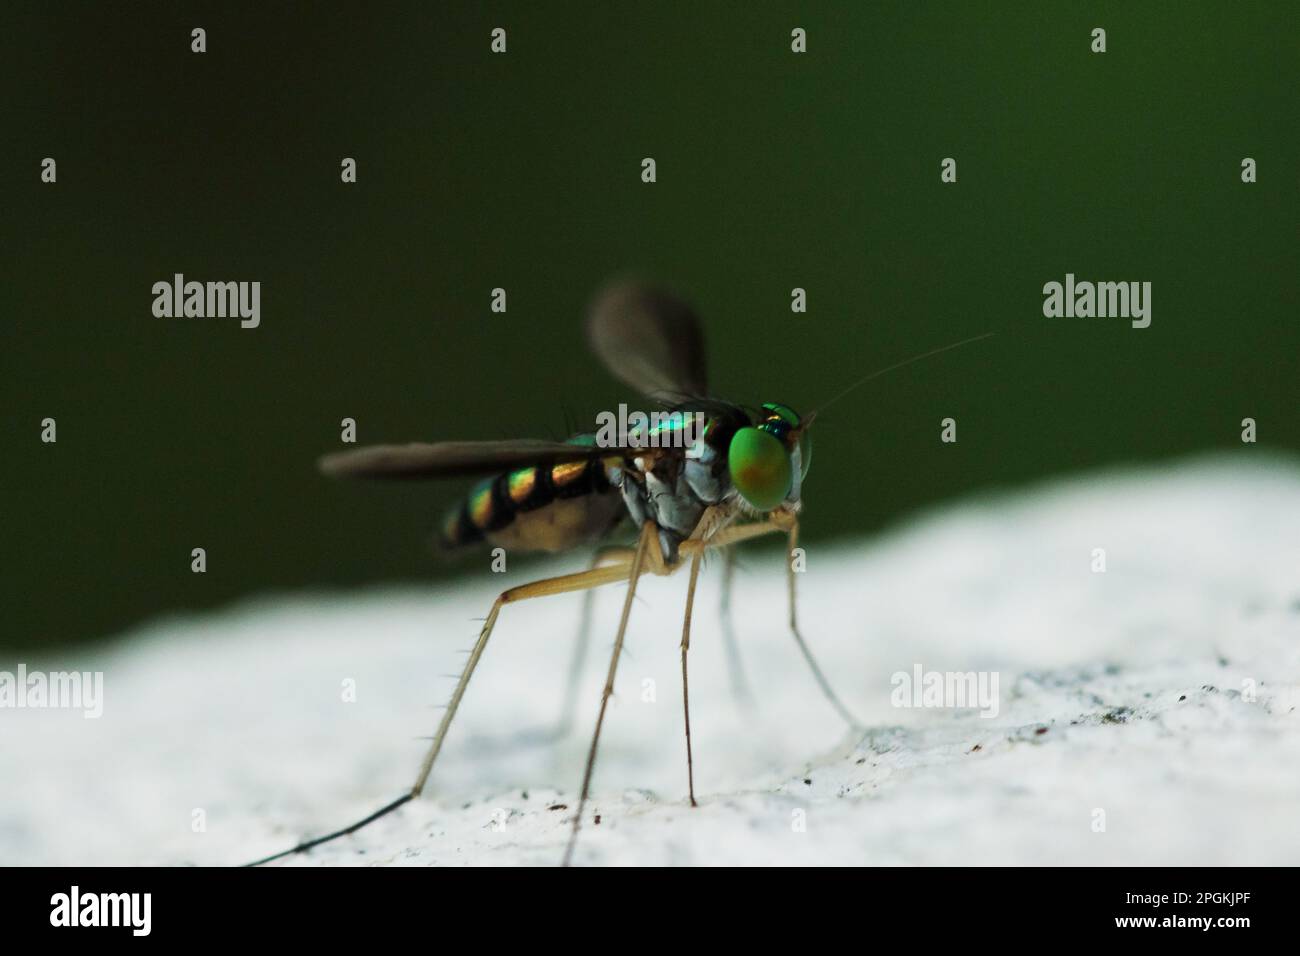 Dolichopodidae On a white background, Dolichopodidae A small fly The body has a metallic color. It has long, slender legs and thin, long body. Stock Photo